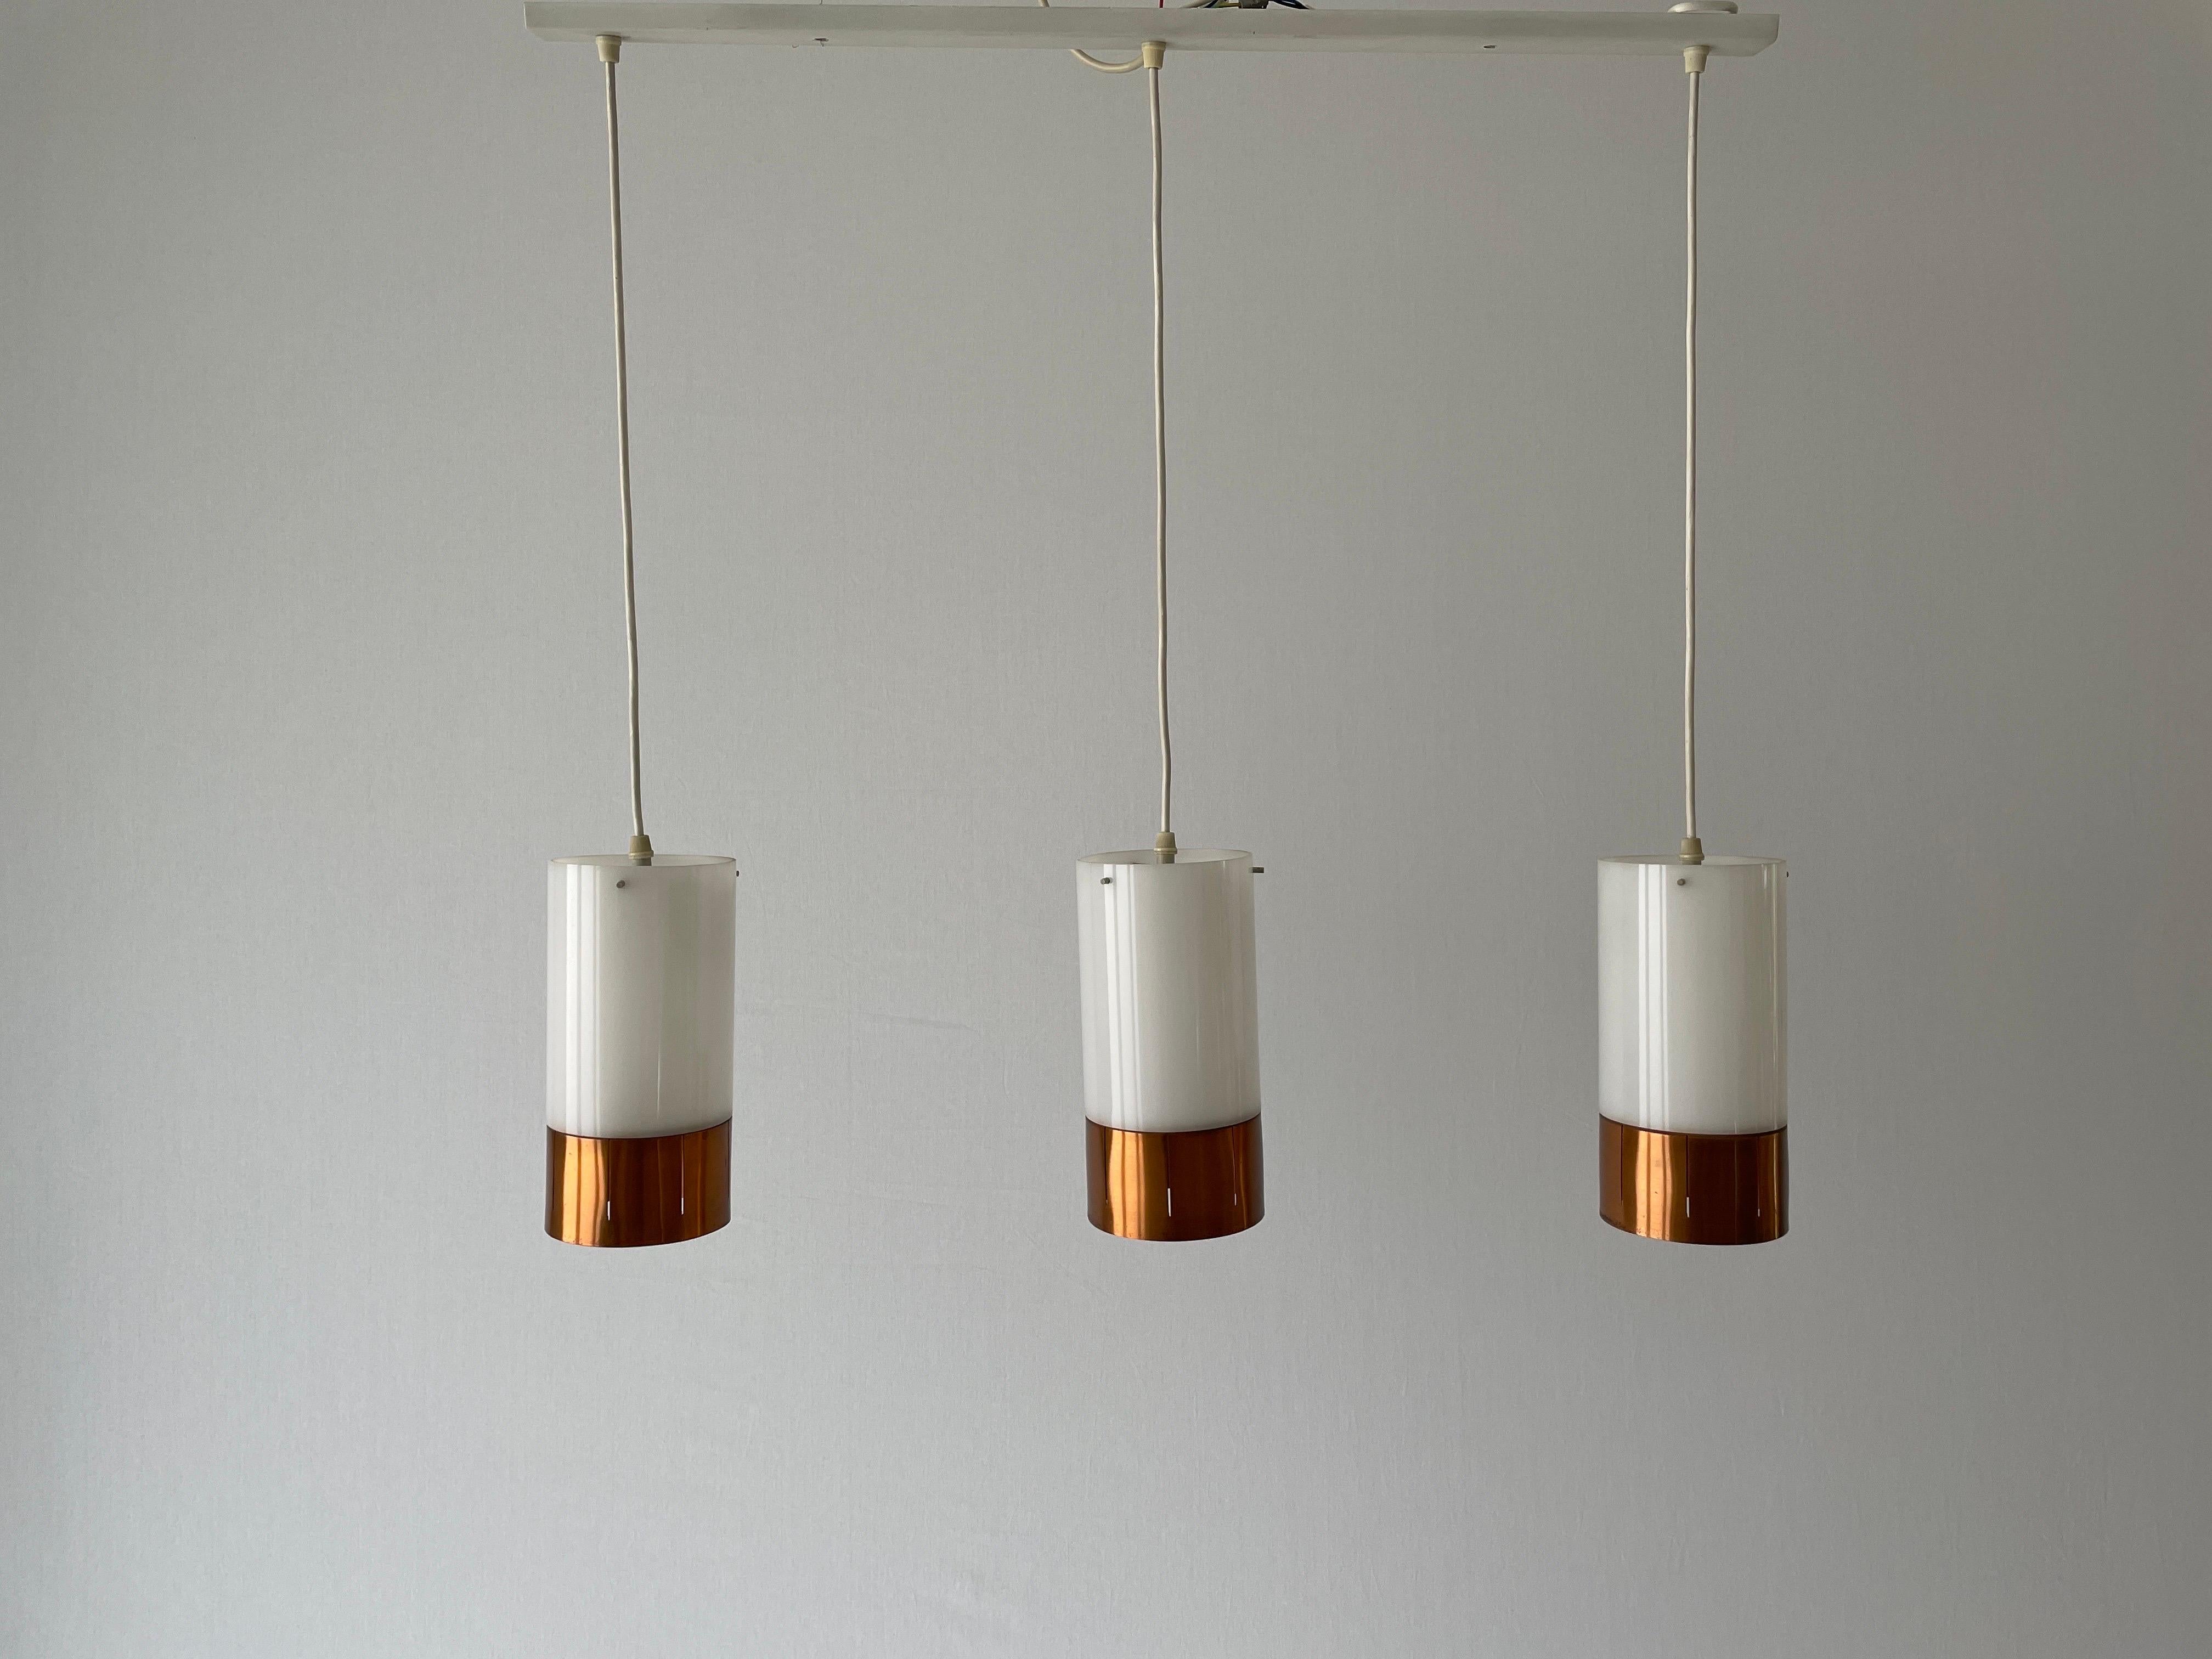 Minimalist Design Copper  Plexiglass Triple Shade Pendant Lamp, 1960s, Germany

Lampshade is in very good vintage condition.

This lamp works with 2x E14 light bulbs. 
Wired and suitable to use with 220V and 110V for all